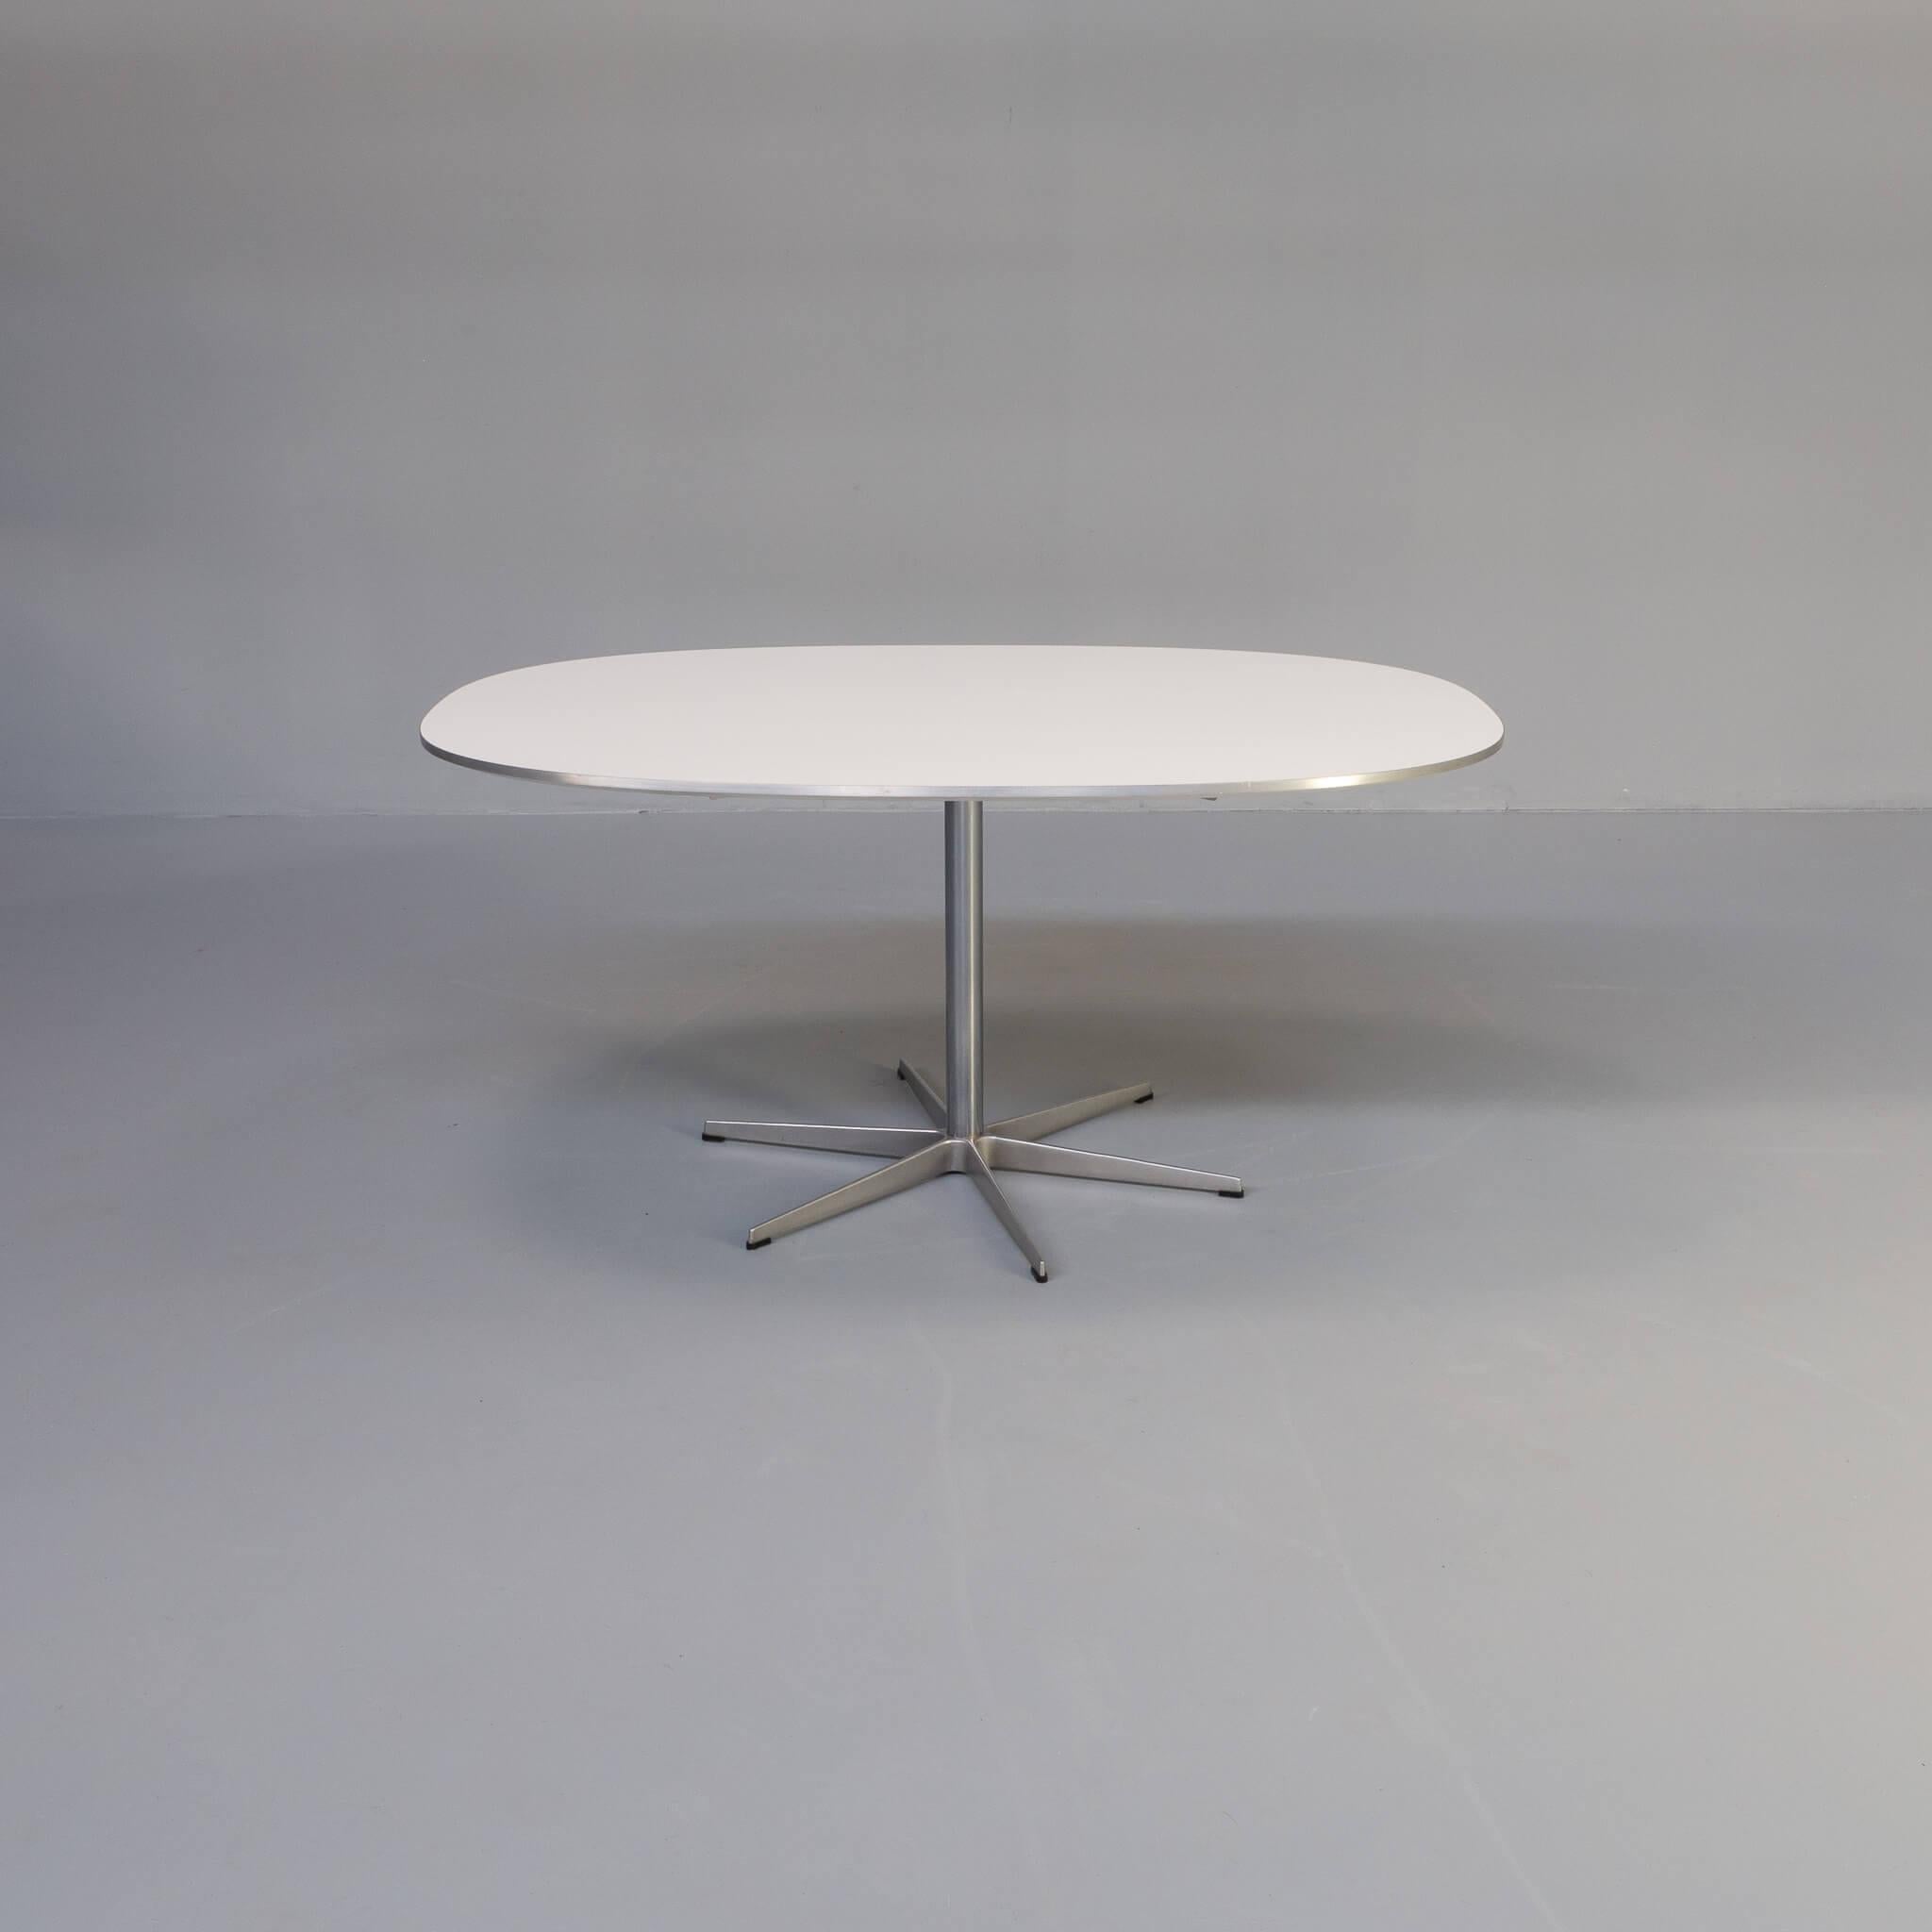 Piet Hein, Arne Jacobsen, and Bruno Mathsson for Fritz Hansen. This design was originally introduced in 1968 and was part of a collaboration between Hein, Jacobsen, and Mathsson. Fritz Hansen’s Table Series includes the Superellipse, the